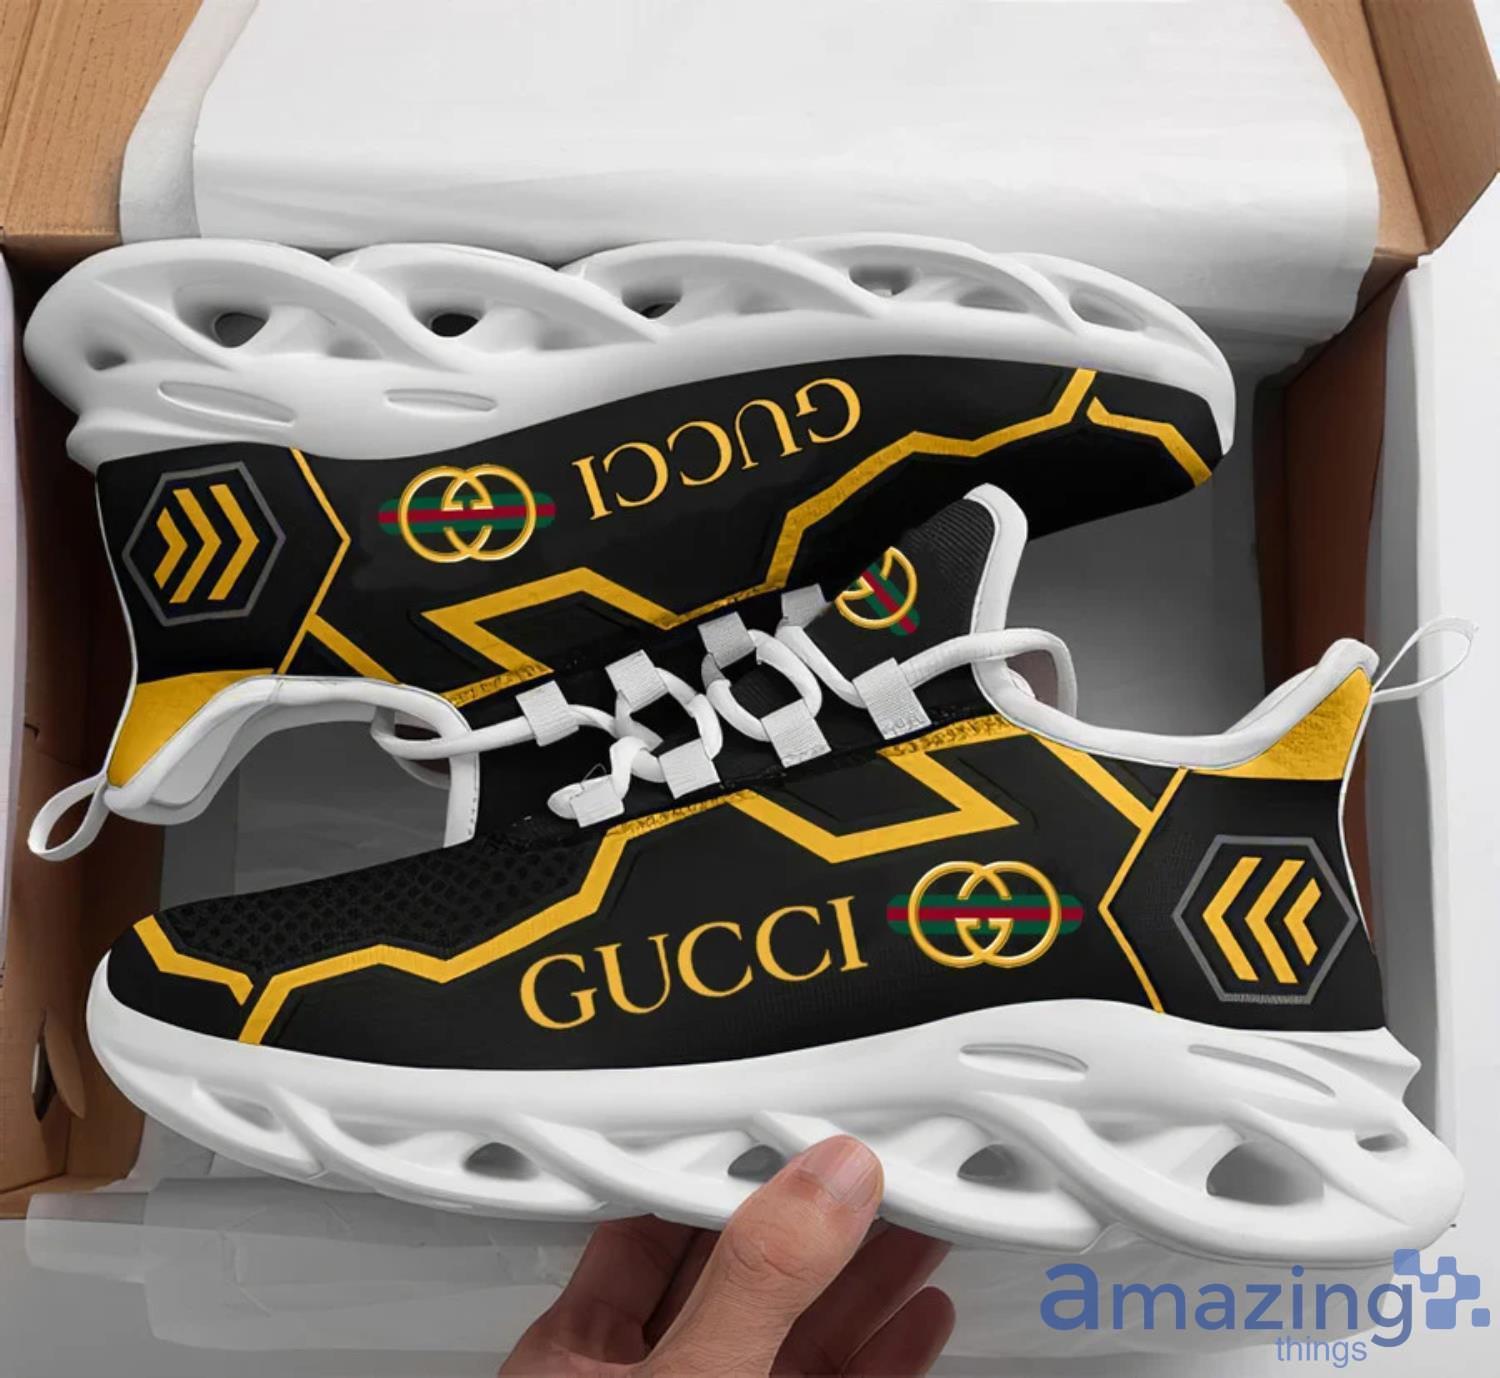 gucci and louis vuitton shoes